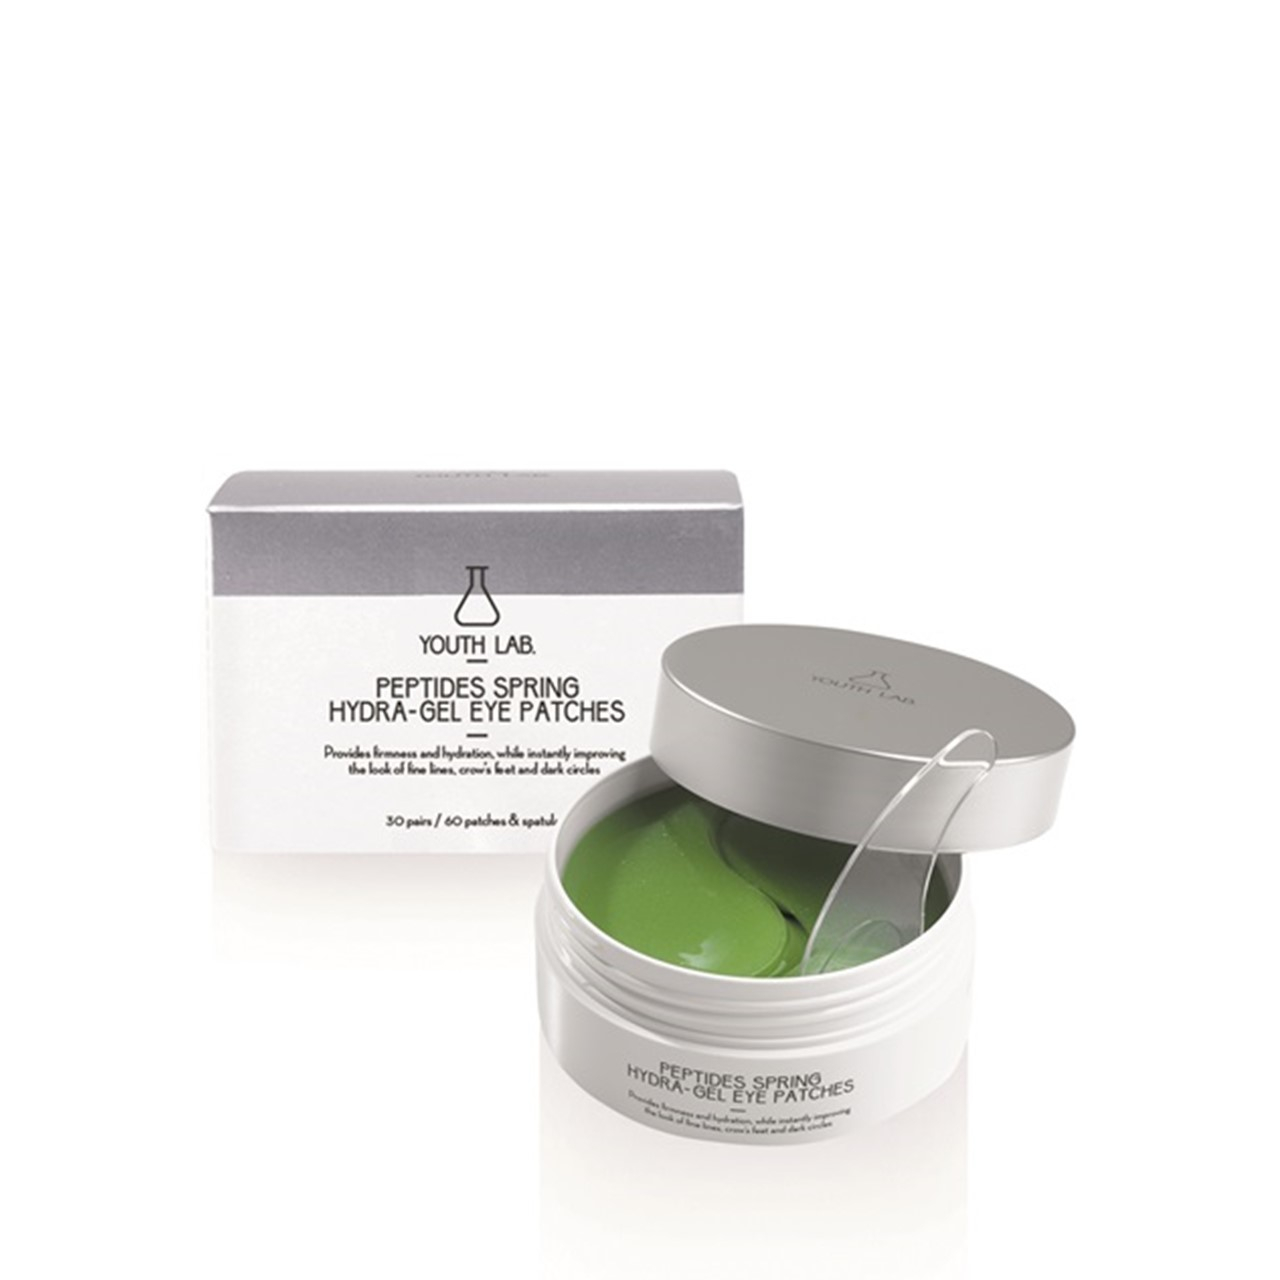 YOUTH LAB Peptides Spring Hydra-Gel Eye Patches x60